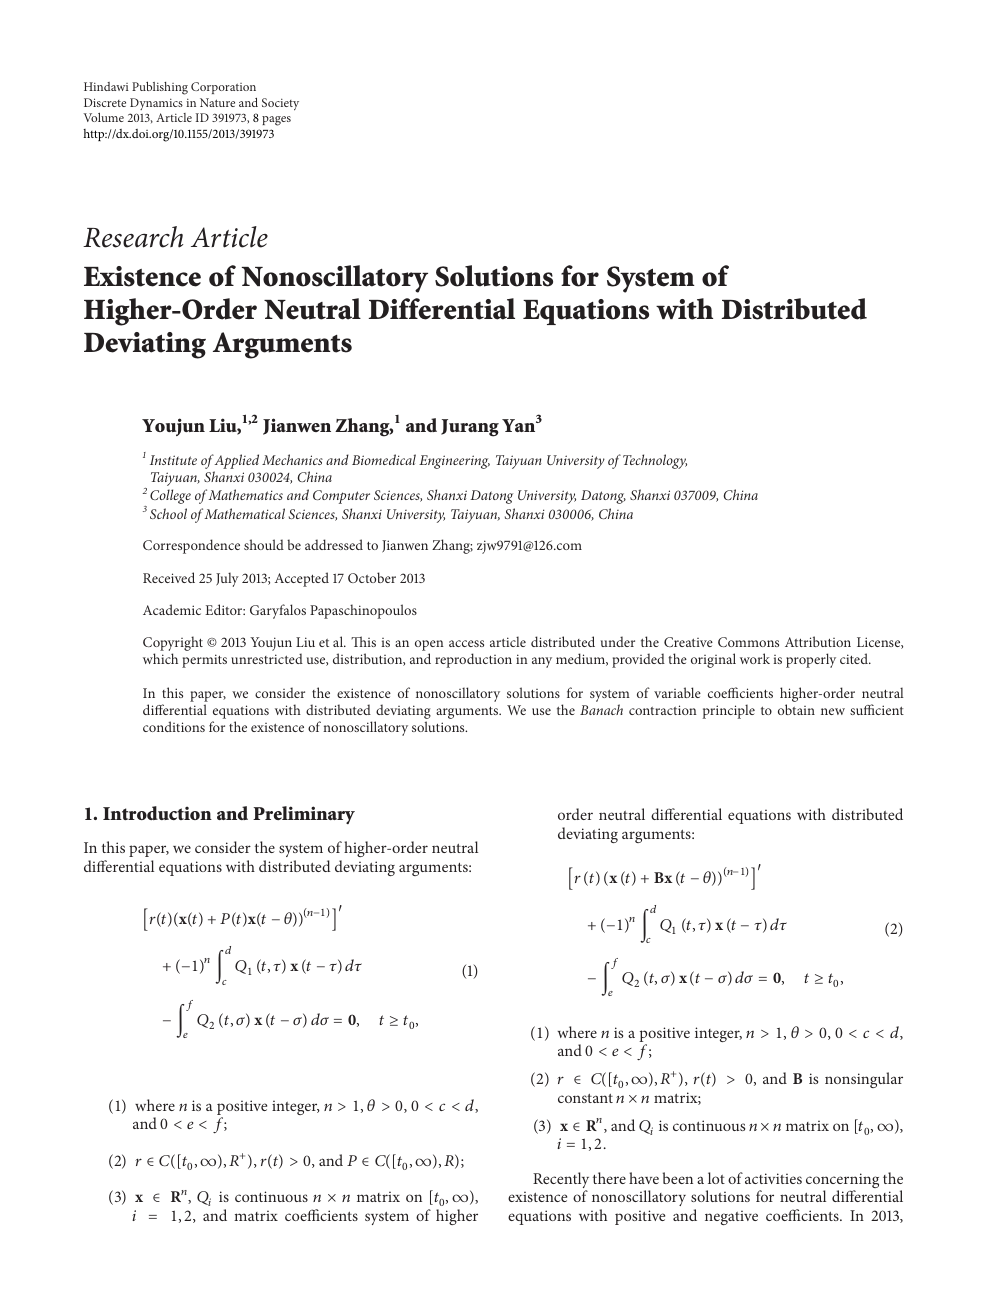 Existence Of Nonoscillatory Solutions For System Of Higher Order Neutral Differential Equations With Distributed Deviating Arguments Topic Of Research Paper In Mathematics Download Scholarly Article Pdf And Read For Free On Cyberleninka